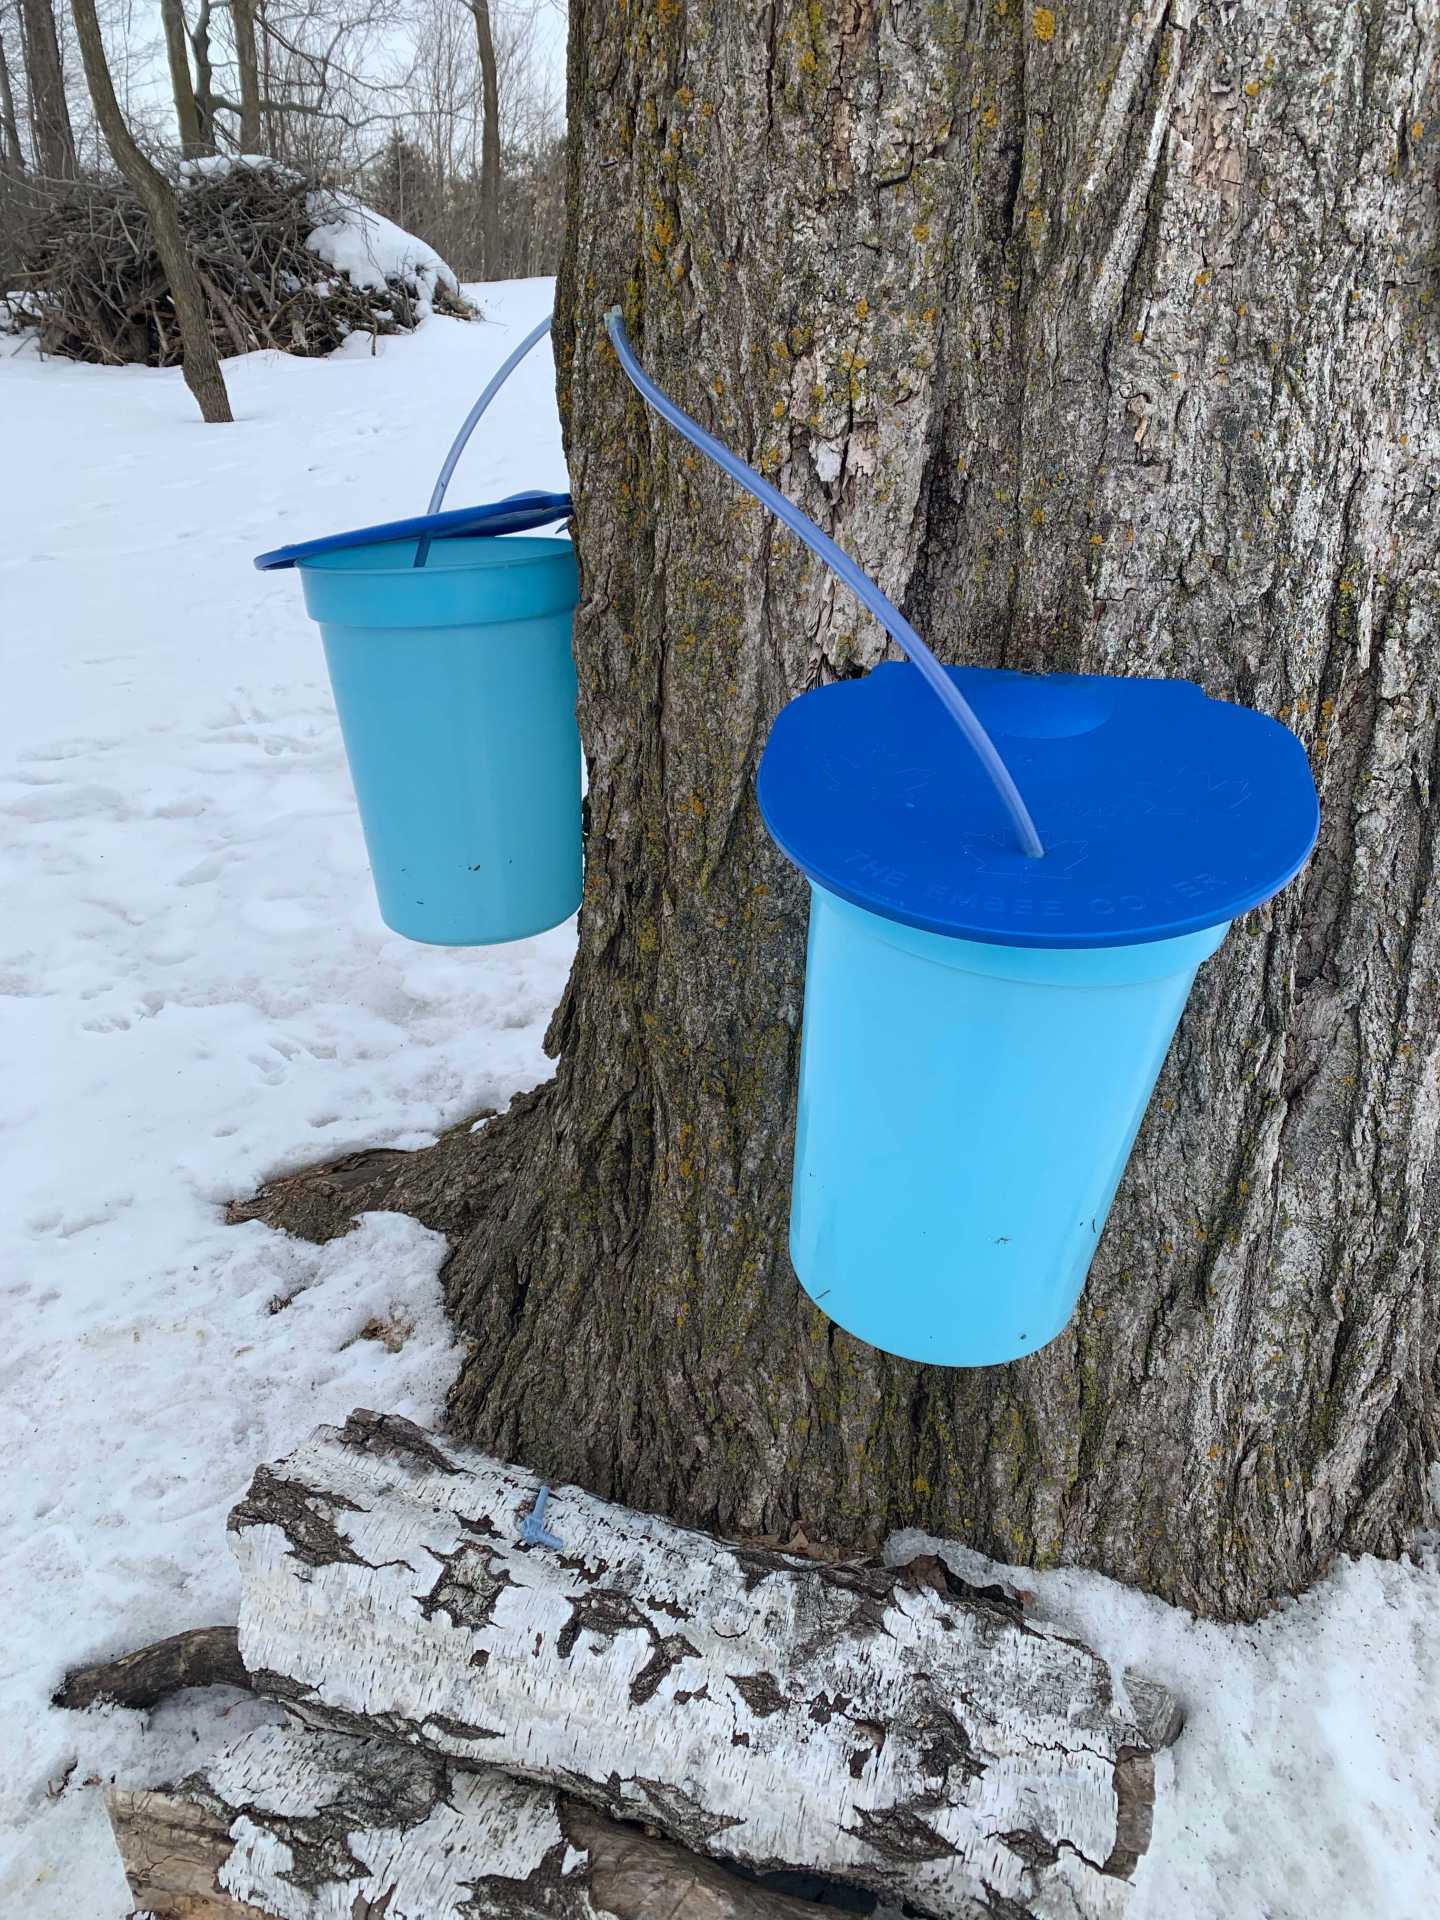 Rural Route Tour Co. maple syrup farm tour | Buckets collecting sap from a maple tree